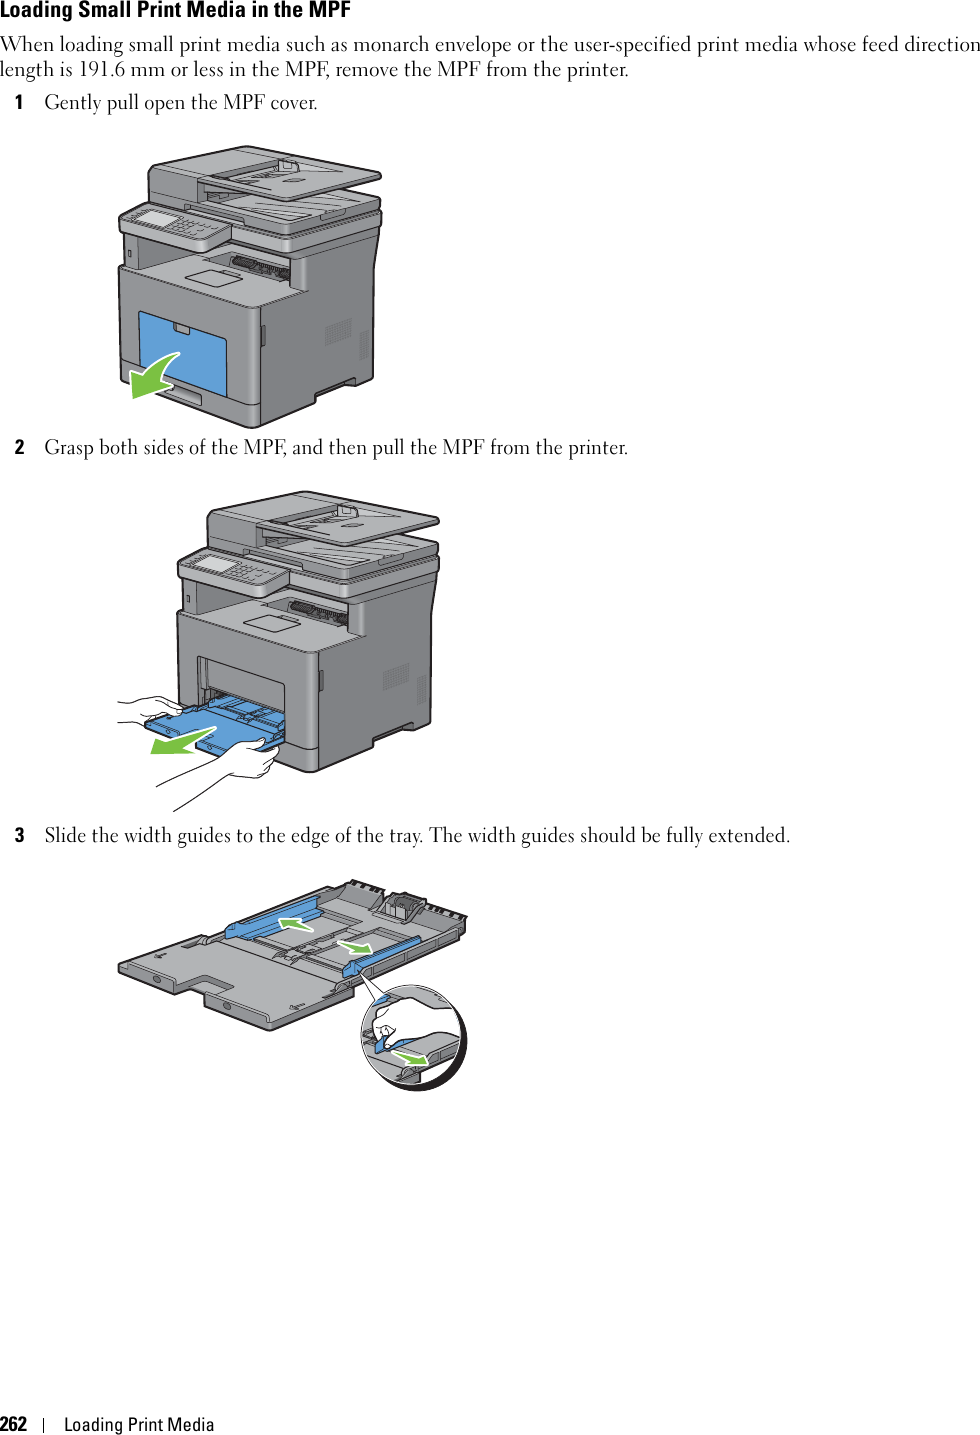 262Loading Print MediaLoading Small Print Media in the MPFWhen loading small print media such as monarch envelope or the user-specified print media whose feed direction length is 191.6 mm or less in the MPF, remove the MPF from the printer.1Gently pull open the MPF cover.2Grasp both sides of the MPF, and then pull the MPF from the printer.3Slide the width guides to the edge of the tray. The width guides should be fully extended.